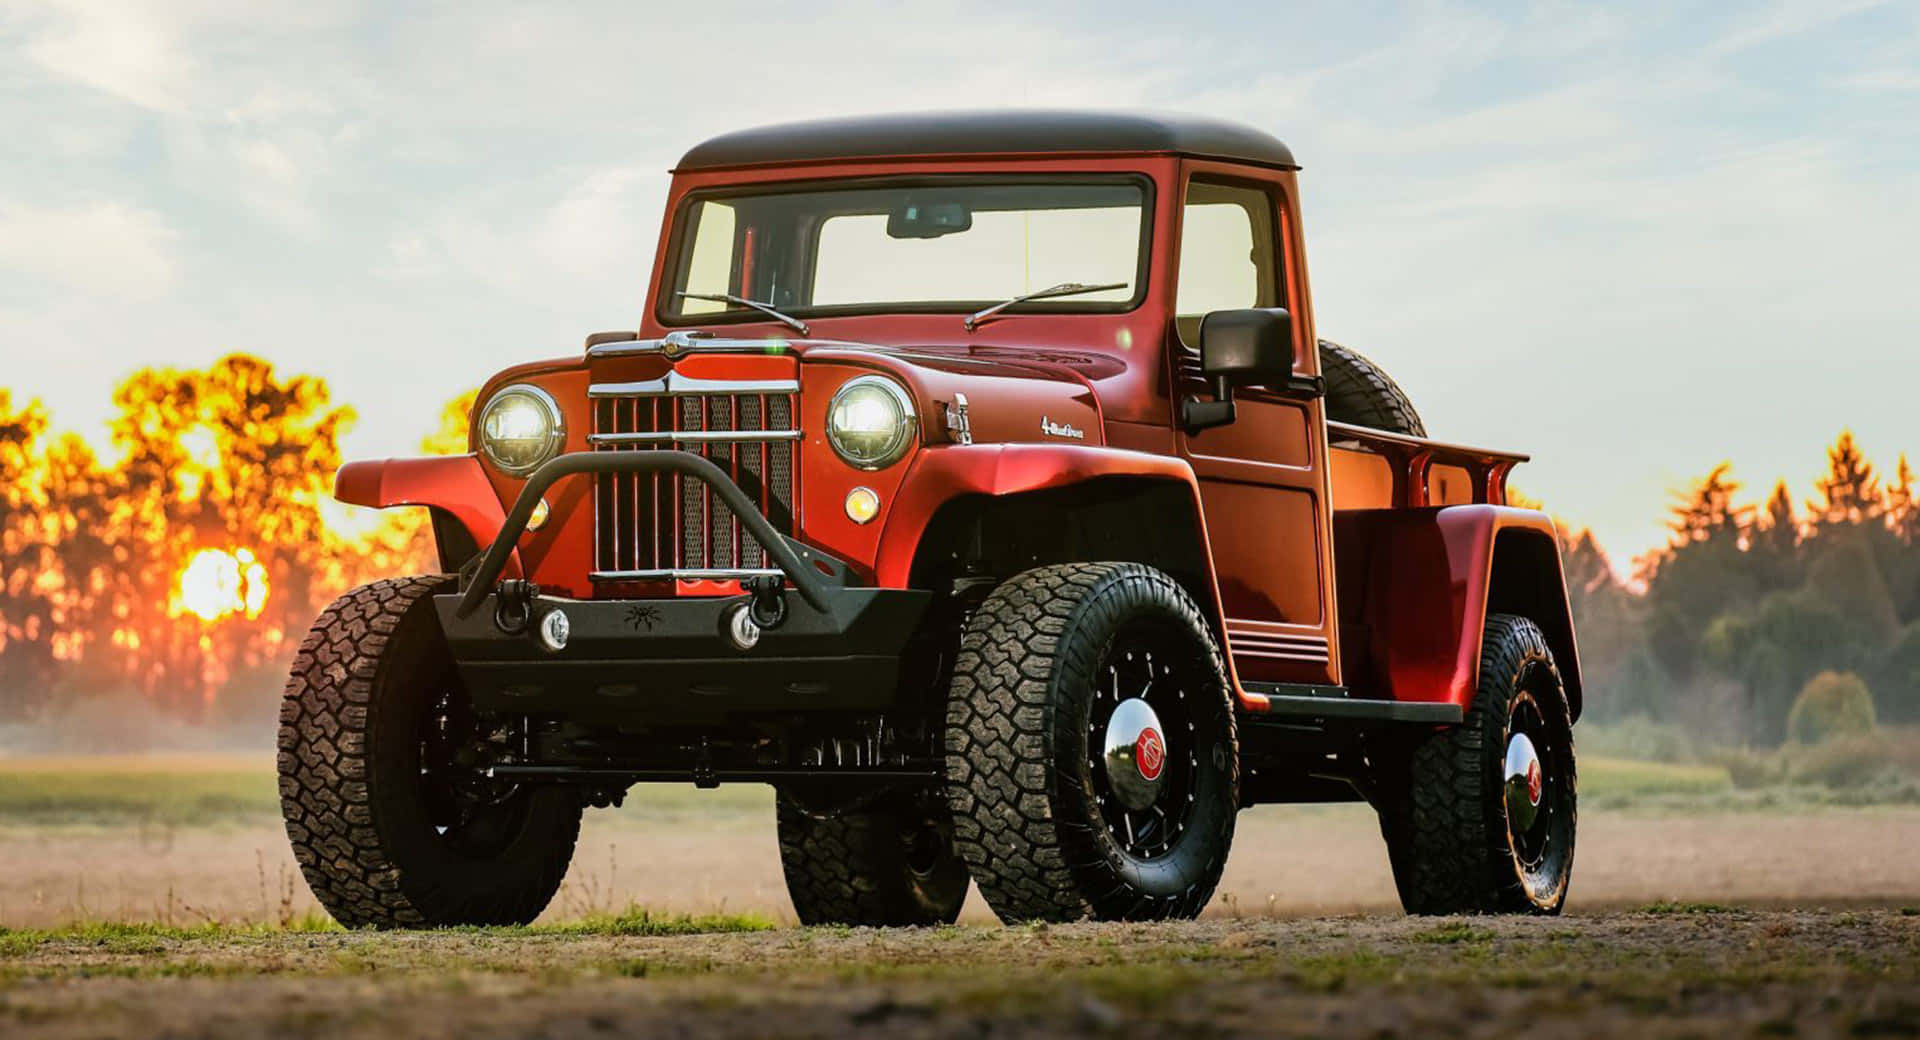 Vintage Jeep Willys in Nature Wallpaper